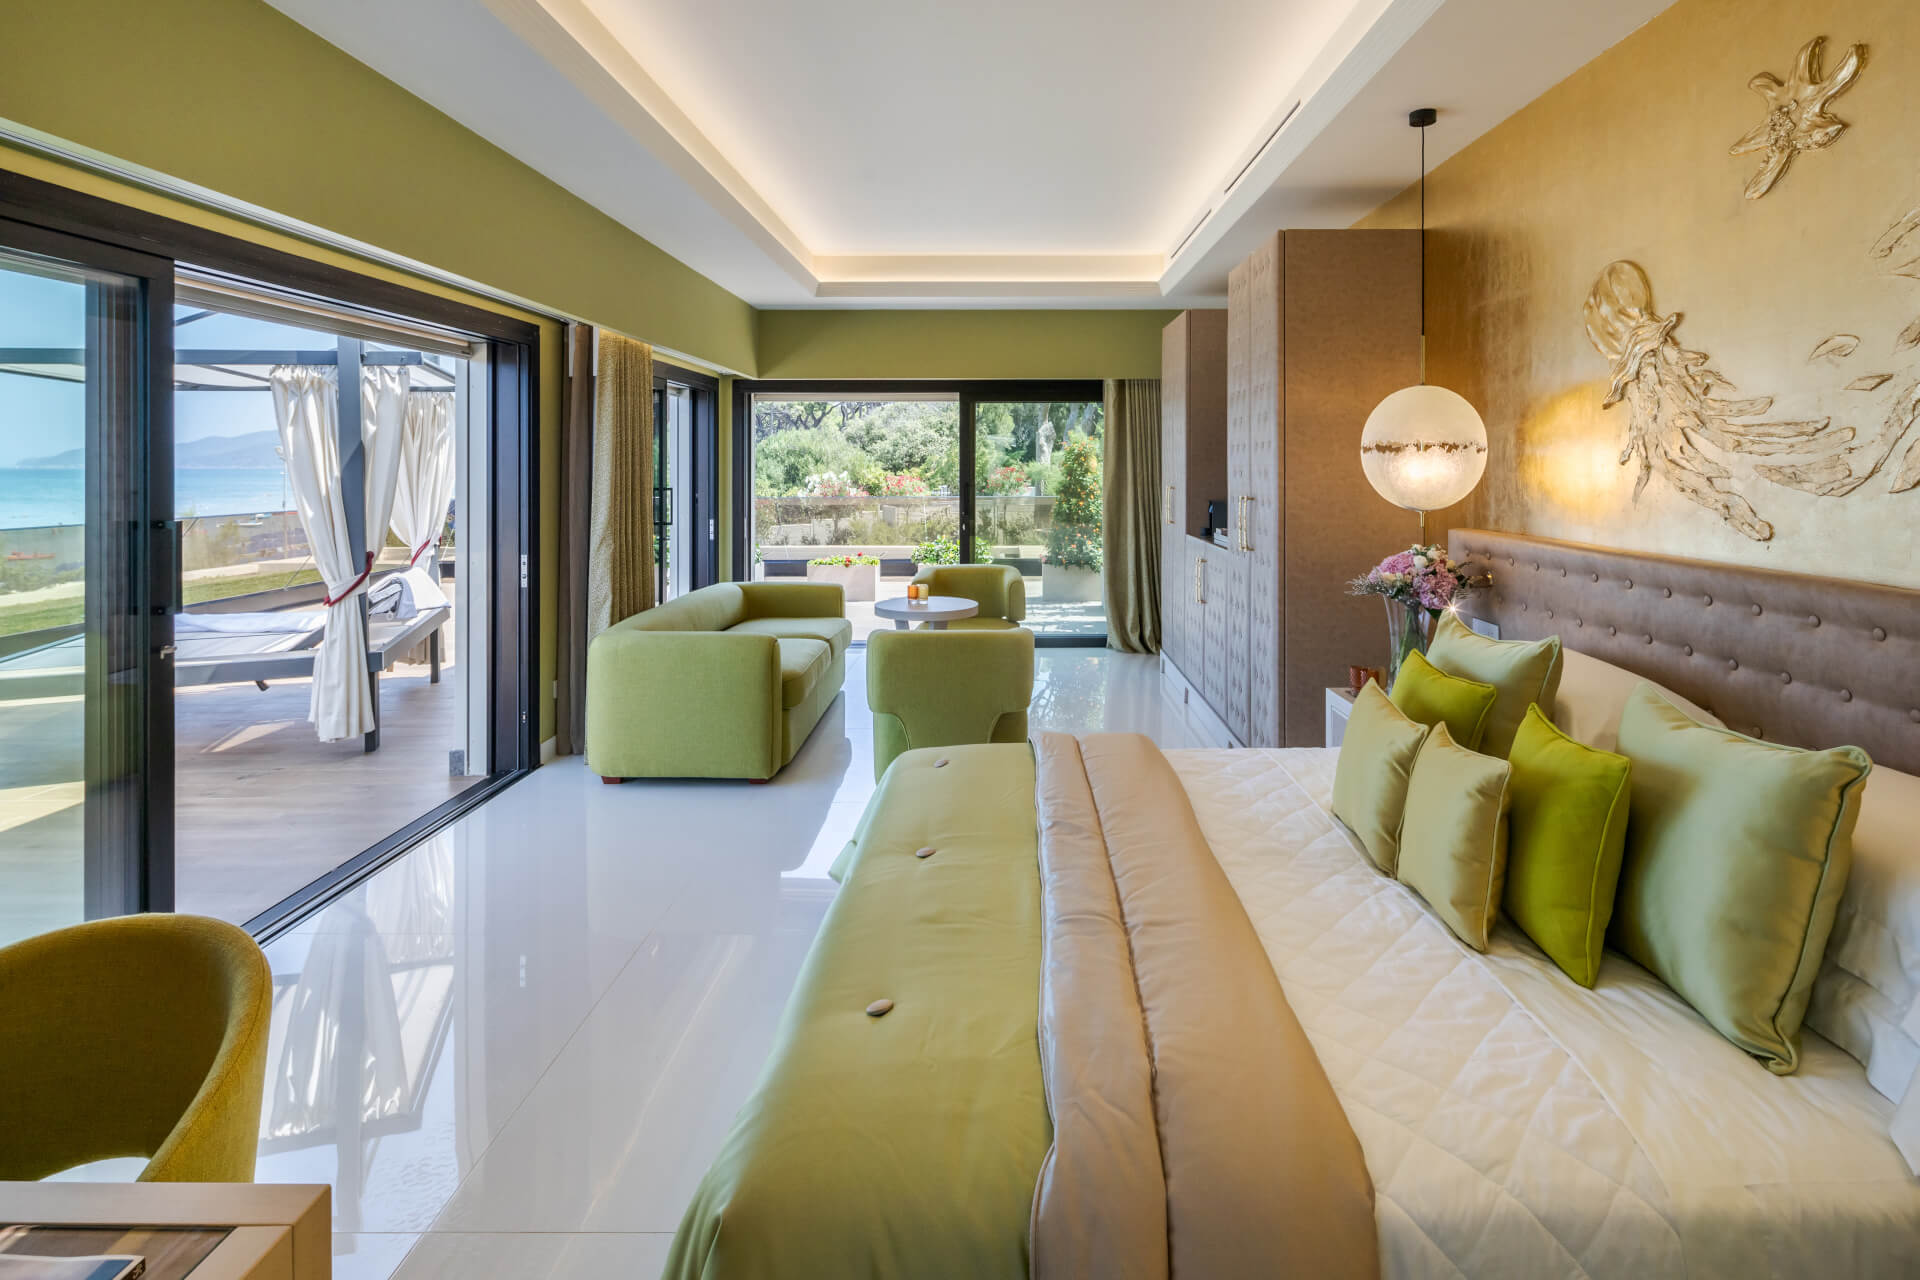 Rooms and suites of Cala Beach Resort